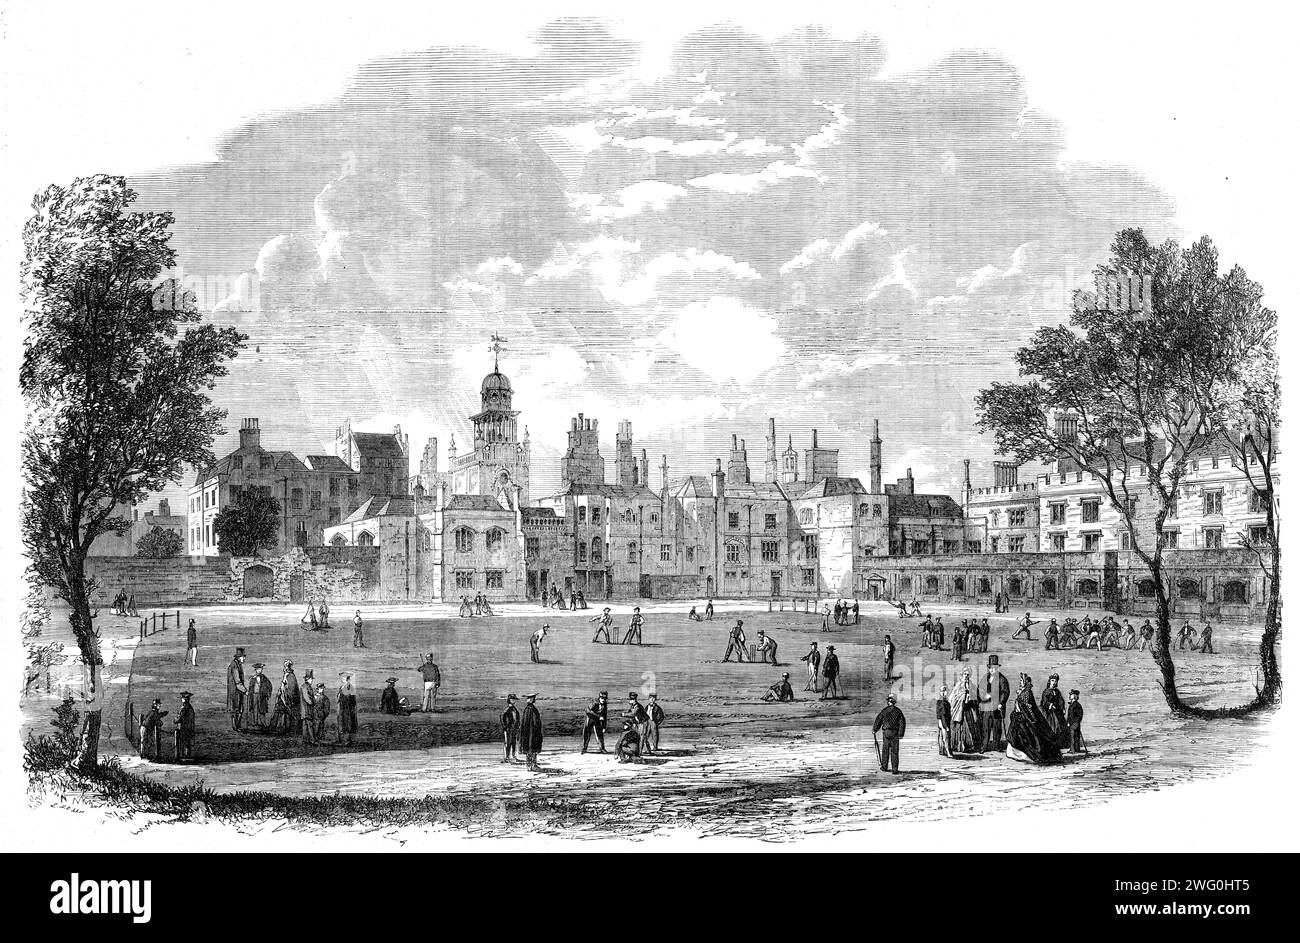 The Great Schools of England - Charterhouse from the Green, 1862. Charterhouse, a public school, was founded by Thomas Sutton in London in 1611 on the site of a Carthusian monastery. It was moved to its present site in Godalming, Surrey, in 1872. From &quot;Illustrated London News&quot;, 1862. Stock Photo